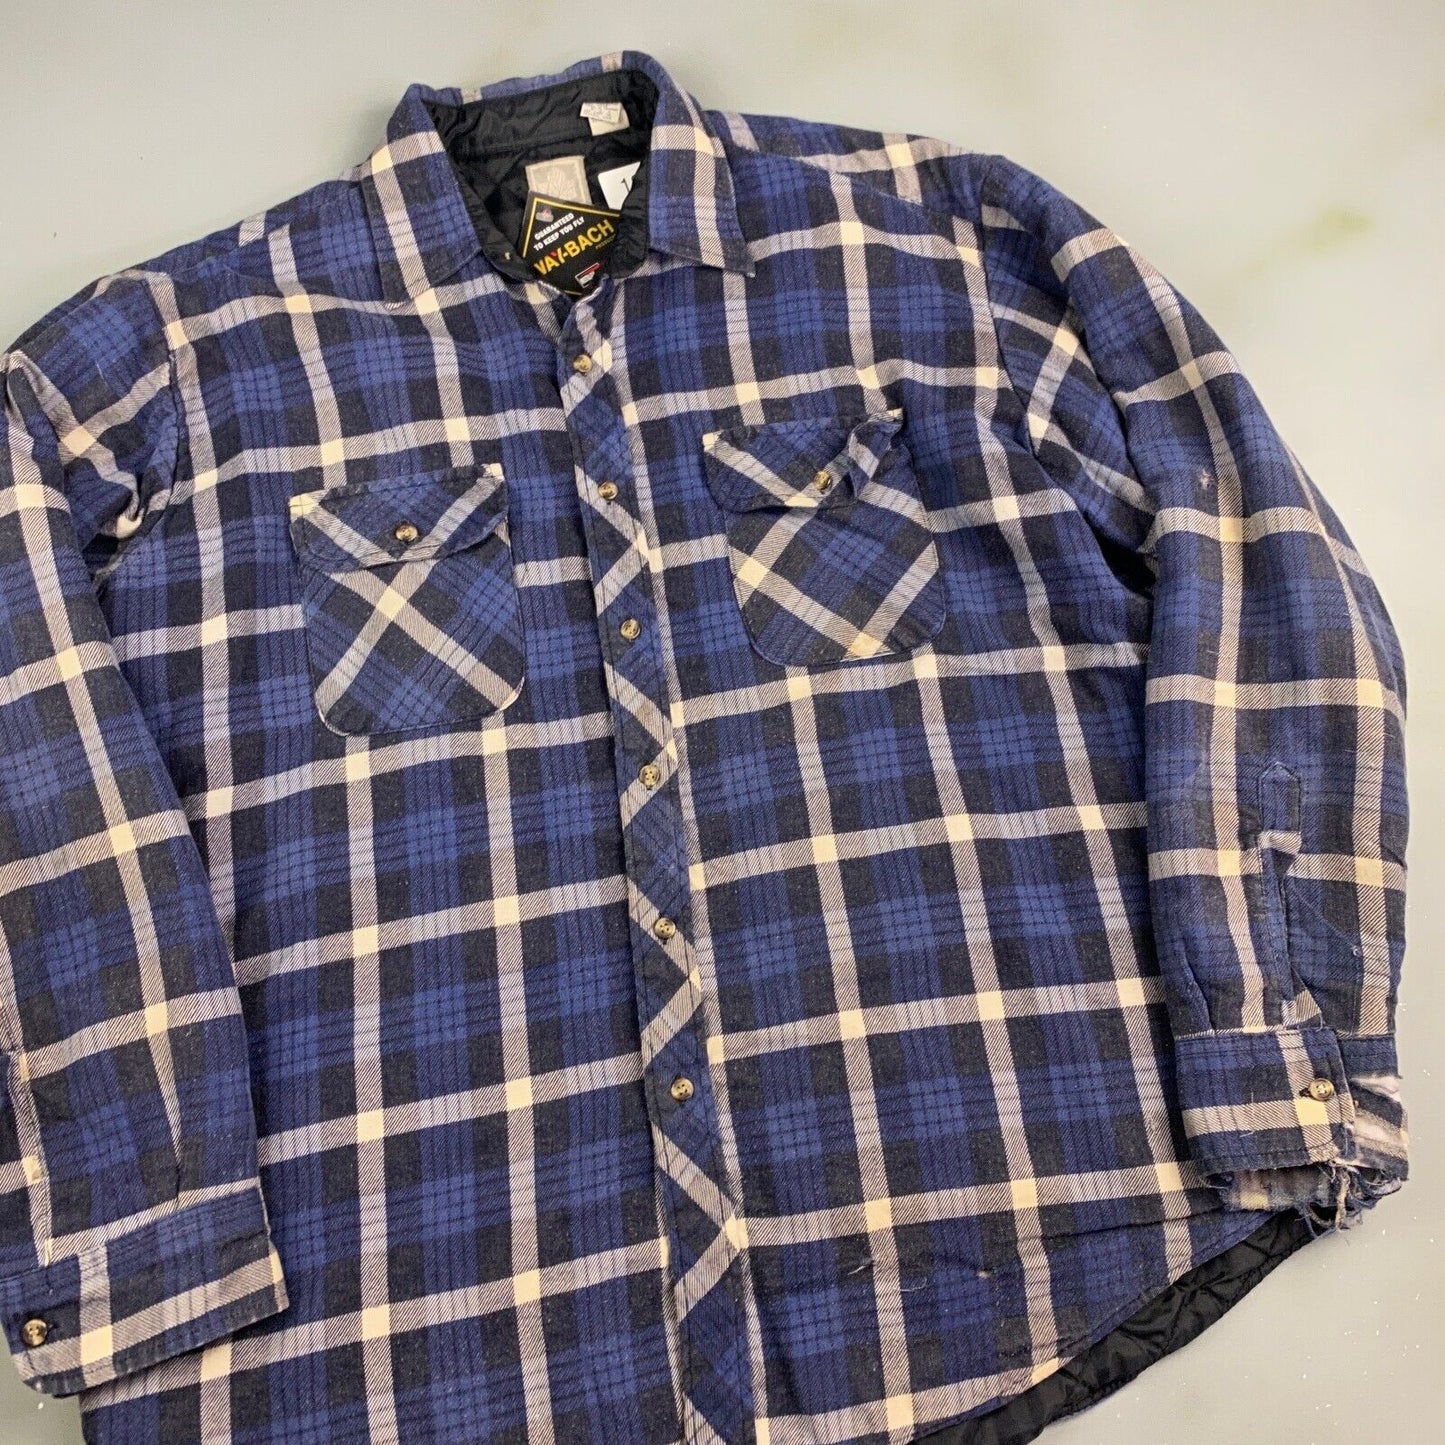 VINTAGE 90s Outdoor Exchange Plaid Lined Flannel Button Up Shirt sz XL Adult